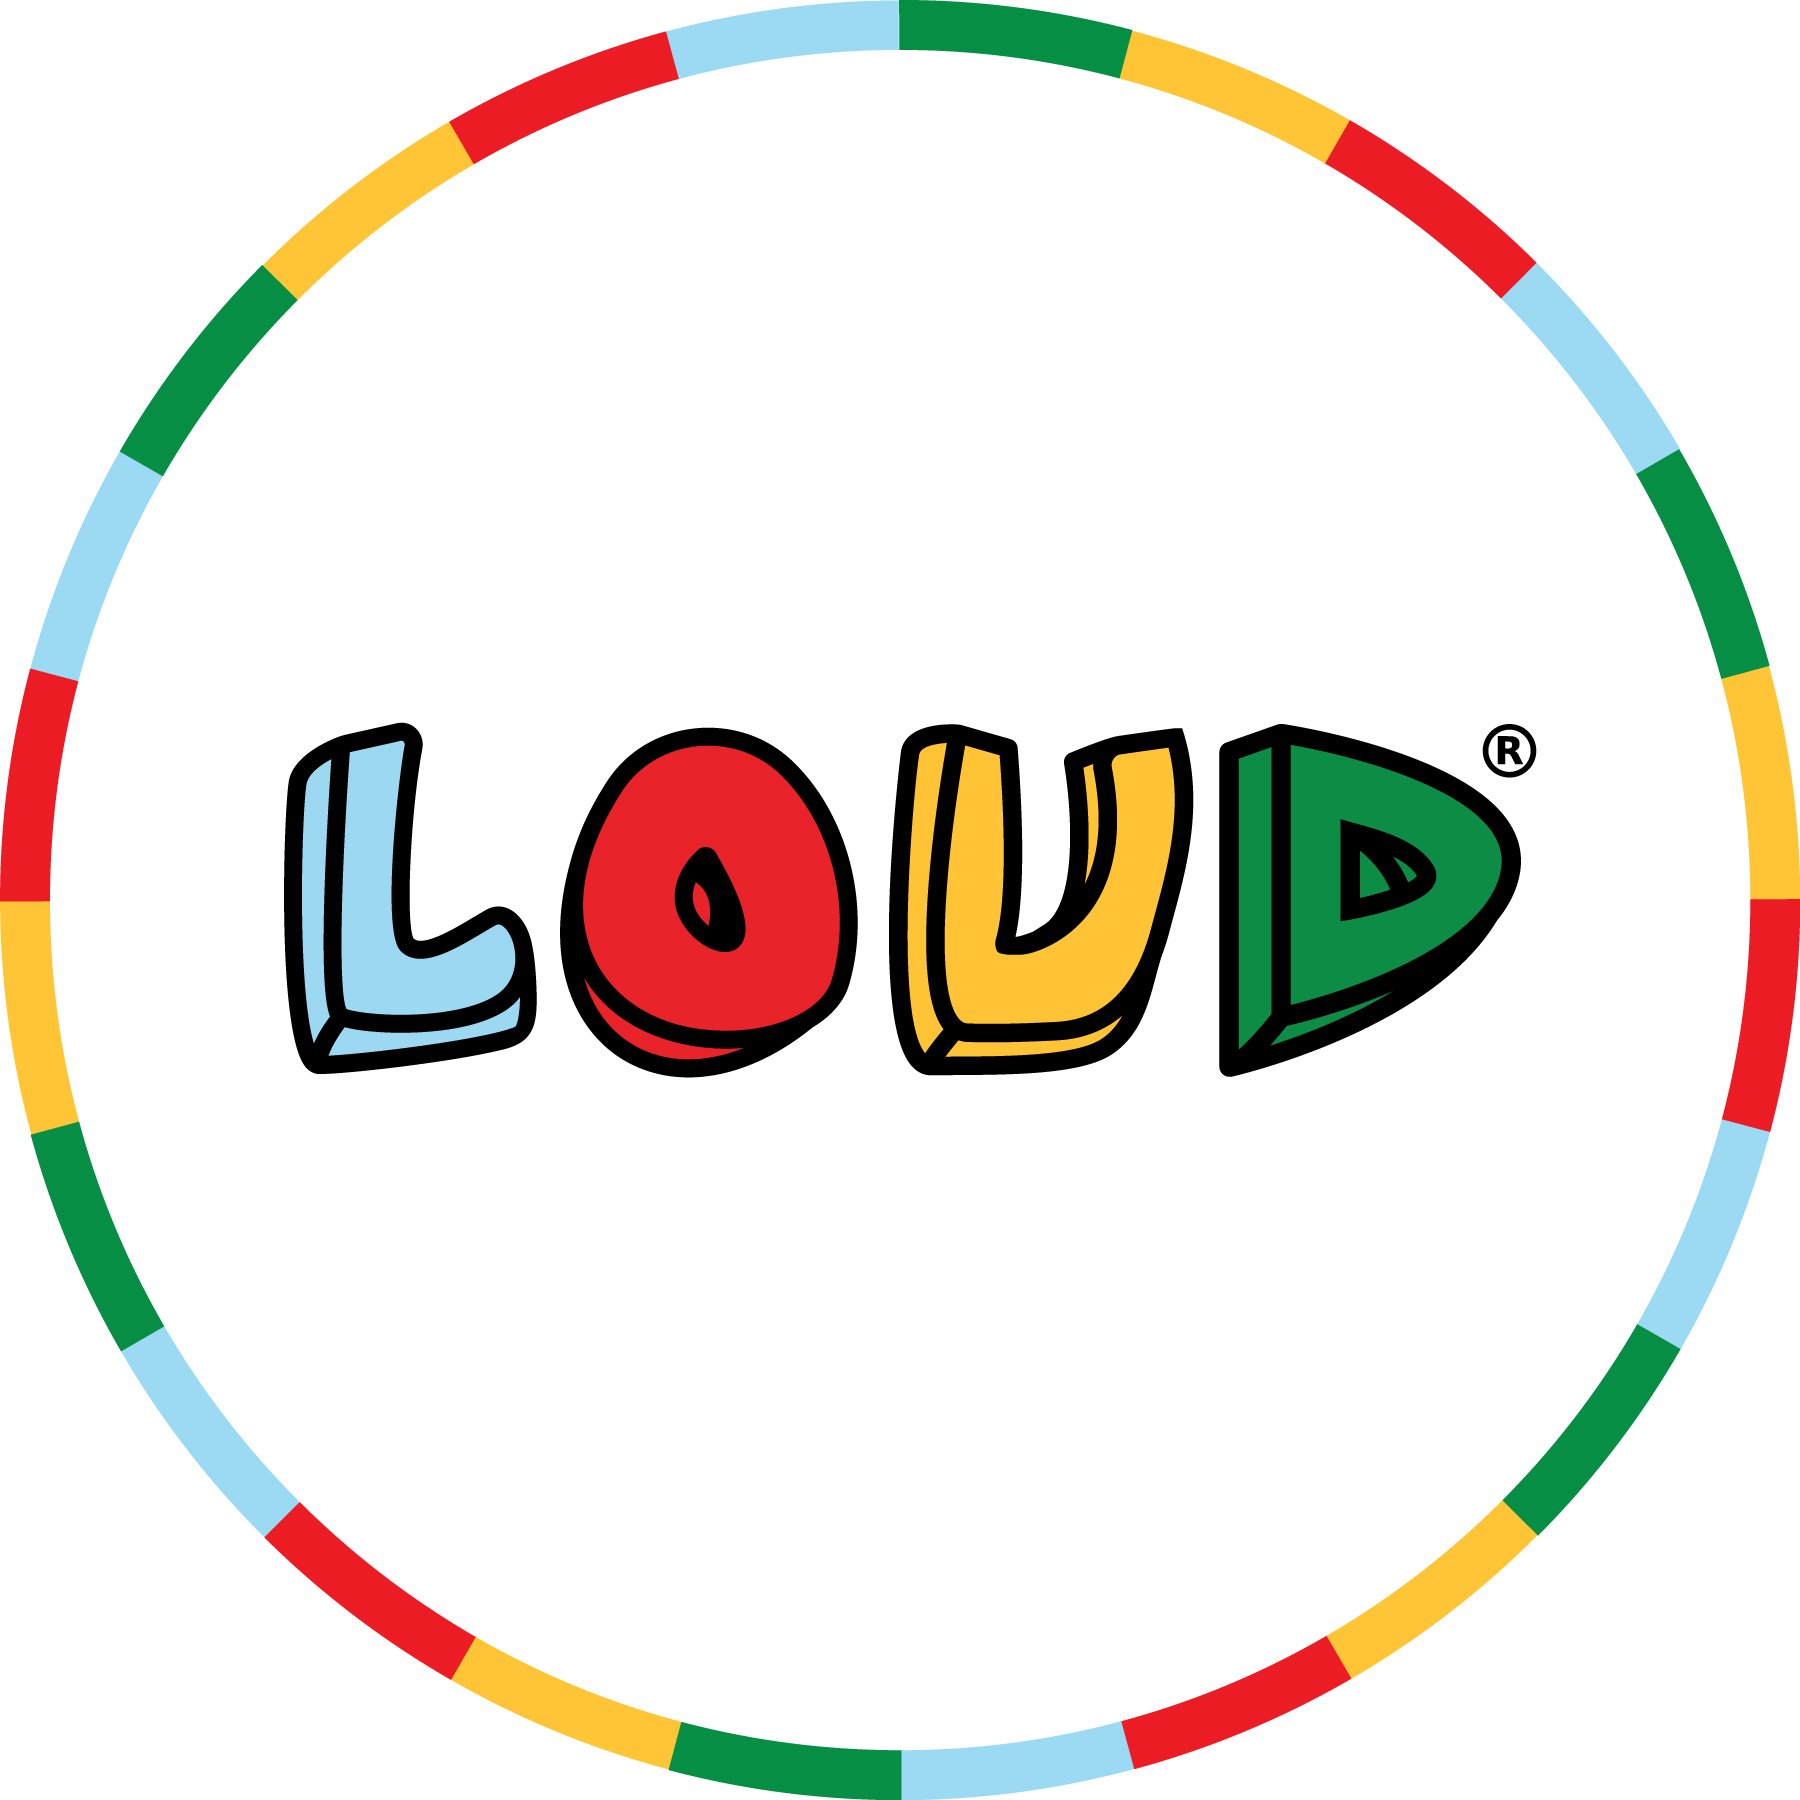 LOUD is a creative agency. Our mission is to use artwork, clothing and design to enable people to pursue their passions and to live out their dreams.